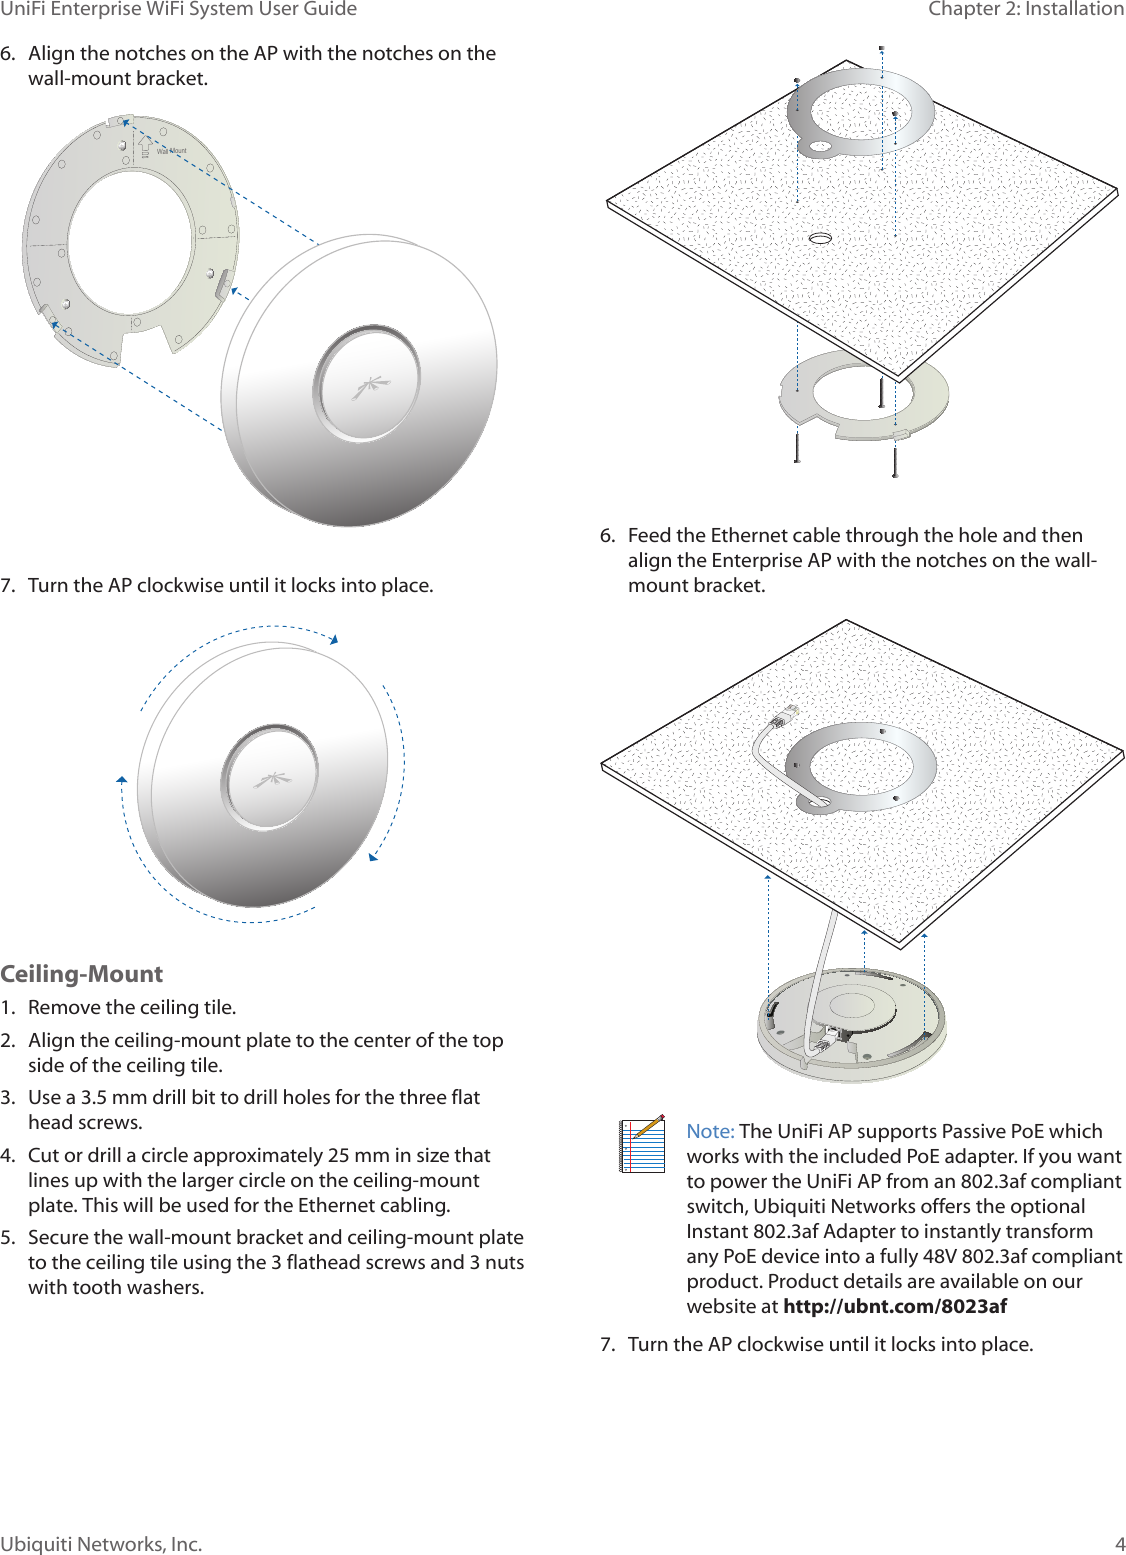 4Ubiquiti Networks, Inc.Chapter 2: Installation UniFi Enterprise WiFi System User Guide6.  Align the notches on the AP with the notches on the wall-mount bracket.Wall Mount7.  Turn the AP clockwise until it locks into place.Wall MountCeiling-Mount1.  Remove the ceiling tile.2.  Align the ceiling-mount plate to the center of the top side of the ceiling tile.3.  Use a 3.5 mm drill bit to drill holes for the three flat head screws.4.  Cut or drill a circle approximately 25 mm in size that lines up with the larger circle on the ceiling-mount plate. This will be used for the Ethernet cabling. 5.  Secure the wall-mount bracket and ceiling-mount plate to the ceiling tile using the 3 flathead screws and 3 nuts with tooth washers.6.  Feed the Ethernet cable through the hole and then align the Enterprise AP with the notches on the wall-mount bracket. Note: The UniFi AP supports Passive PoE which works with the included PoE adapter. If you want to power the UniFi AP from an 802.3af compliant switch, Ubiquiti Networks offers the optional Instant 802.3af Adapter to instantly transform any PoE device into a fully 48V 802.3af compliant product. Product details are available on our website at http://ubnt.com/8023af 7.  Turn the AP clockwise until it locks into place.